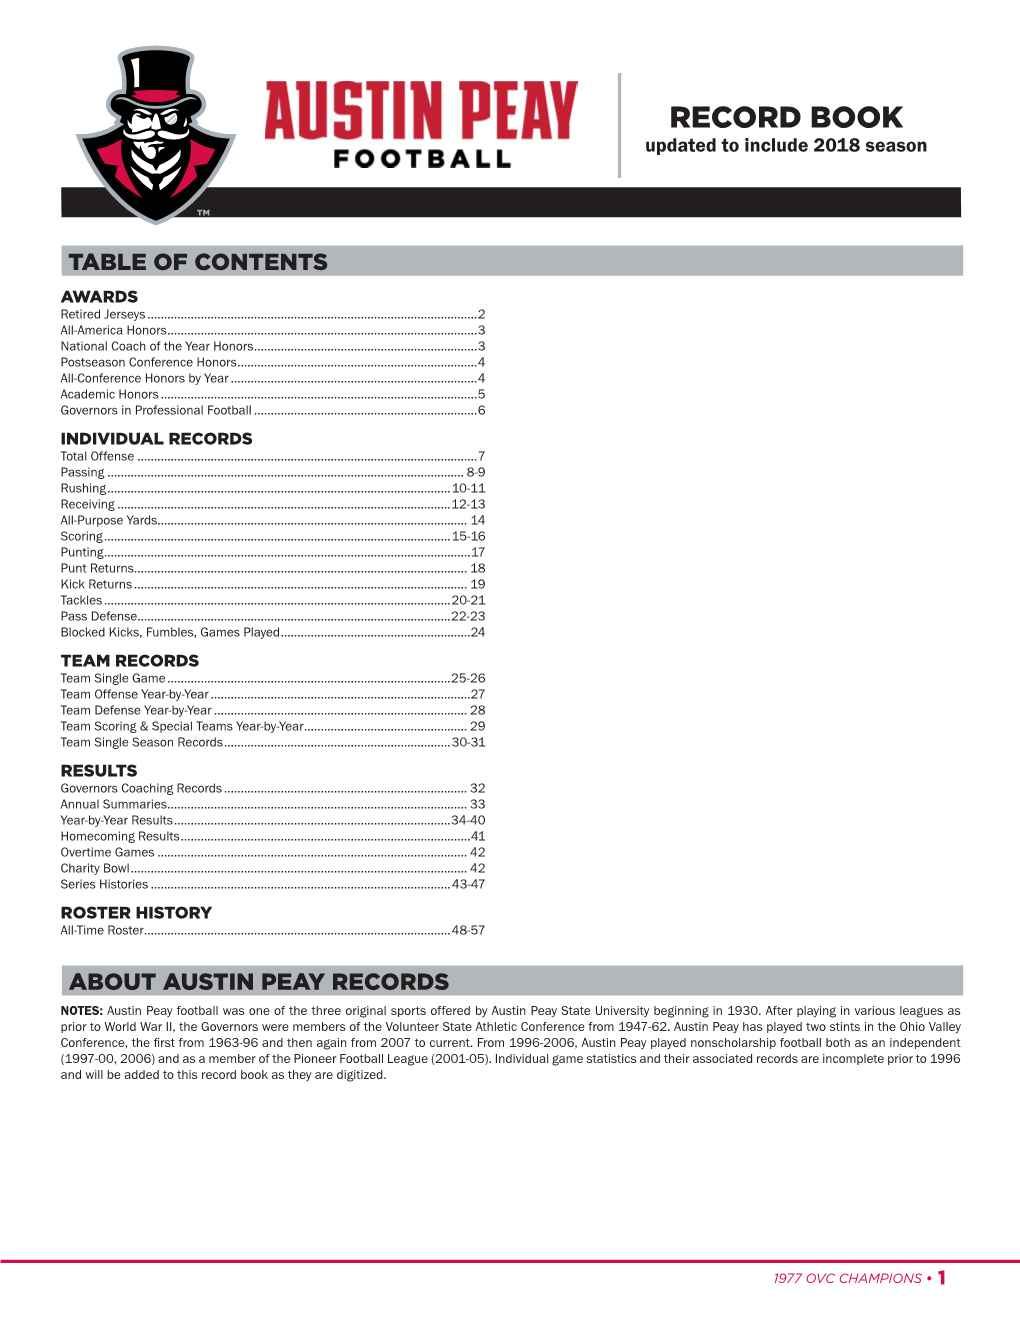 RECORD BOOK Updated to Include 2018 Season